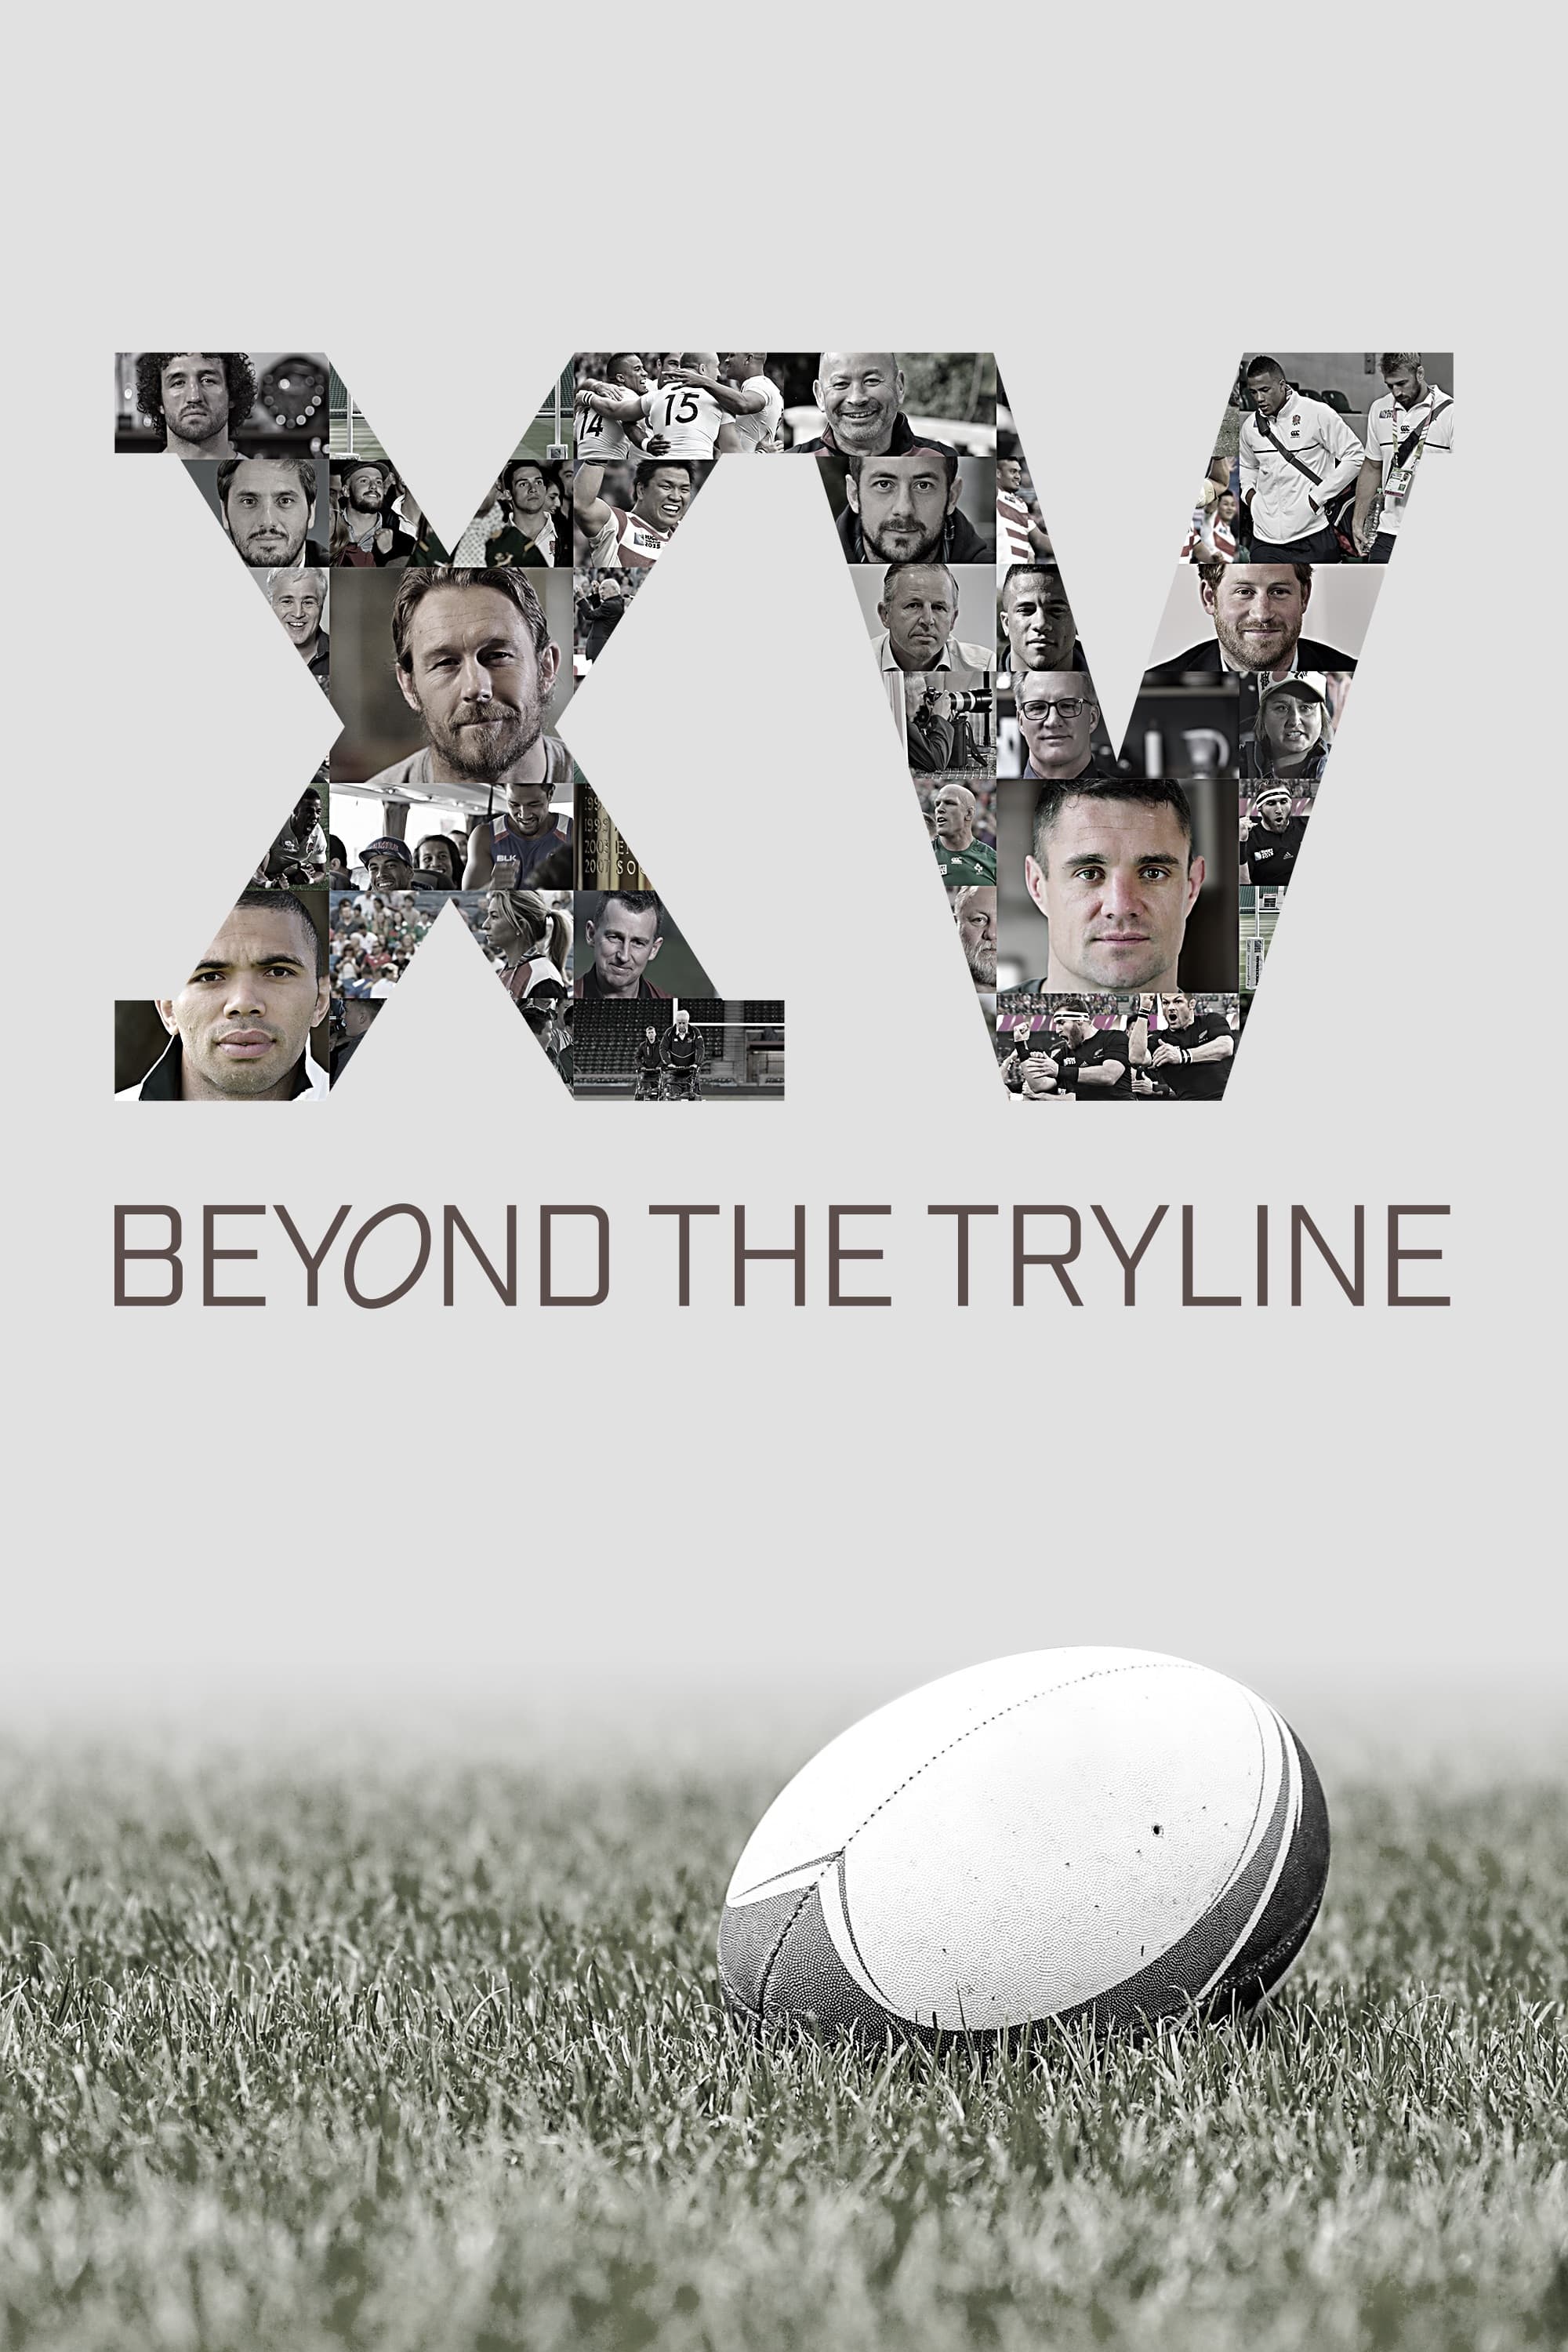 Beyond the Tryline (2016)